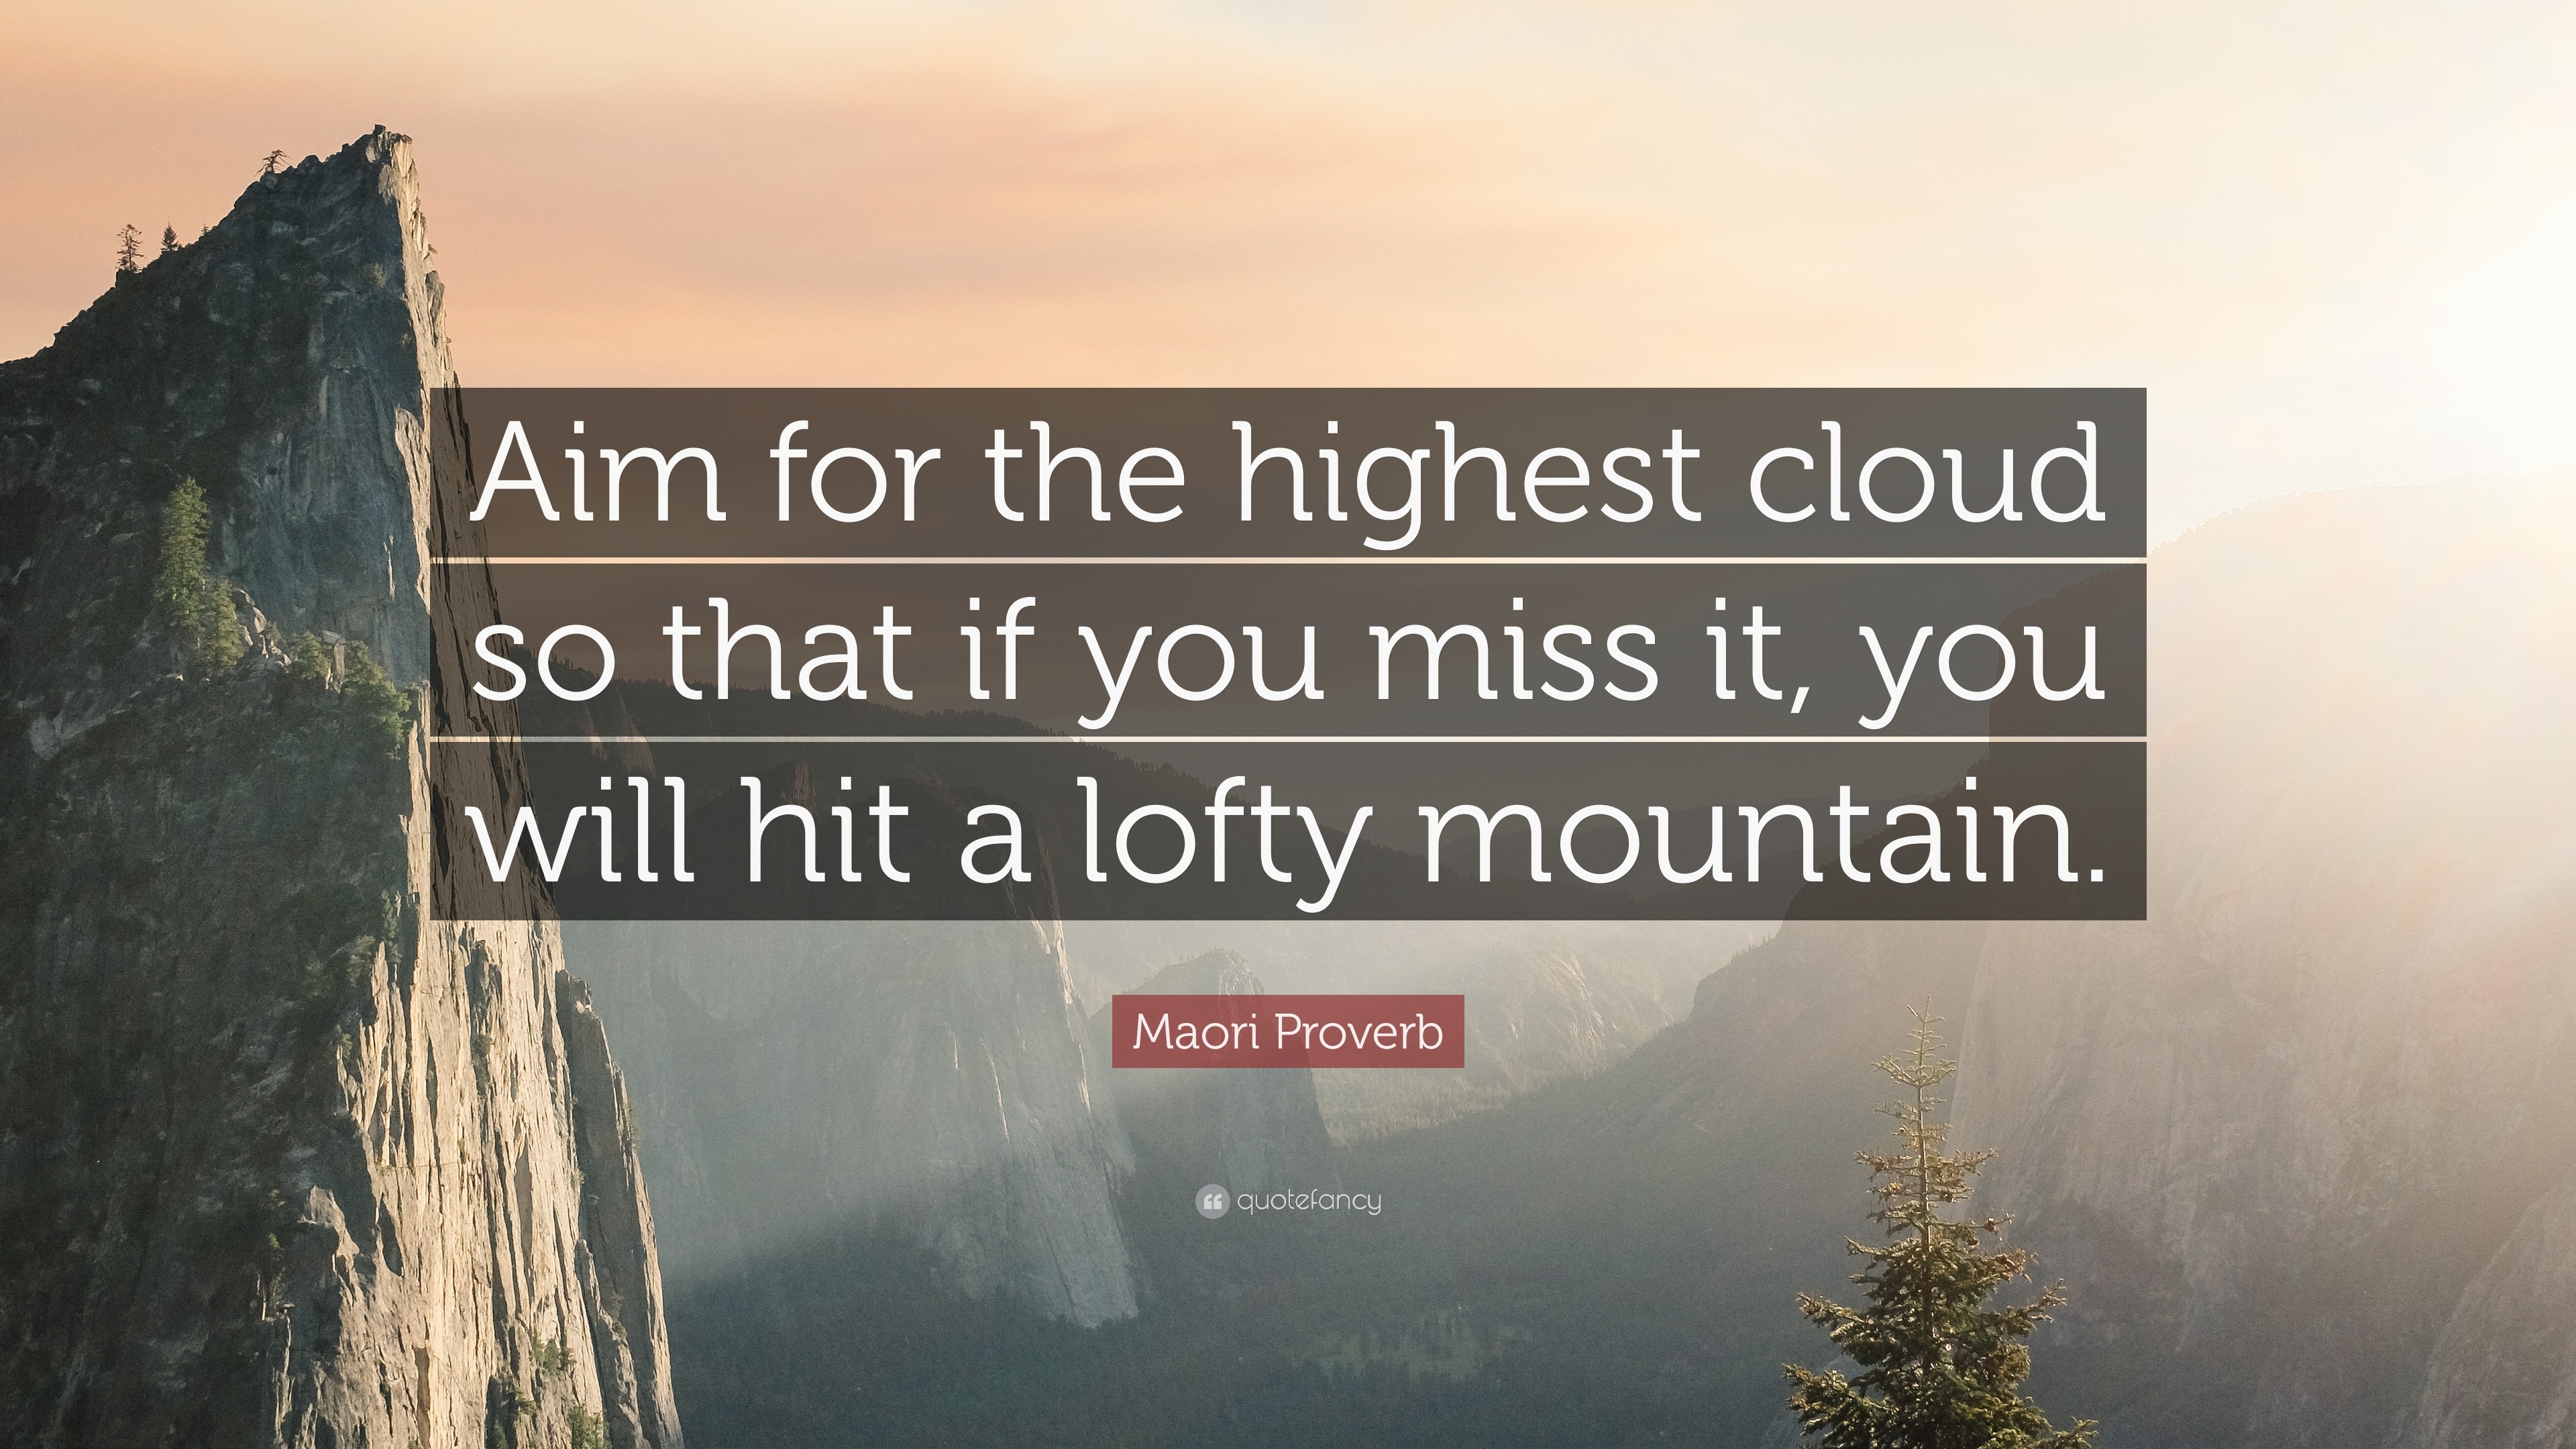 Maori Proverb Quote: “Aim for the highest cloud so that if you miss it, you  will